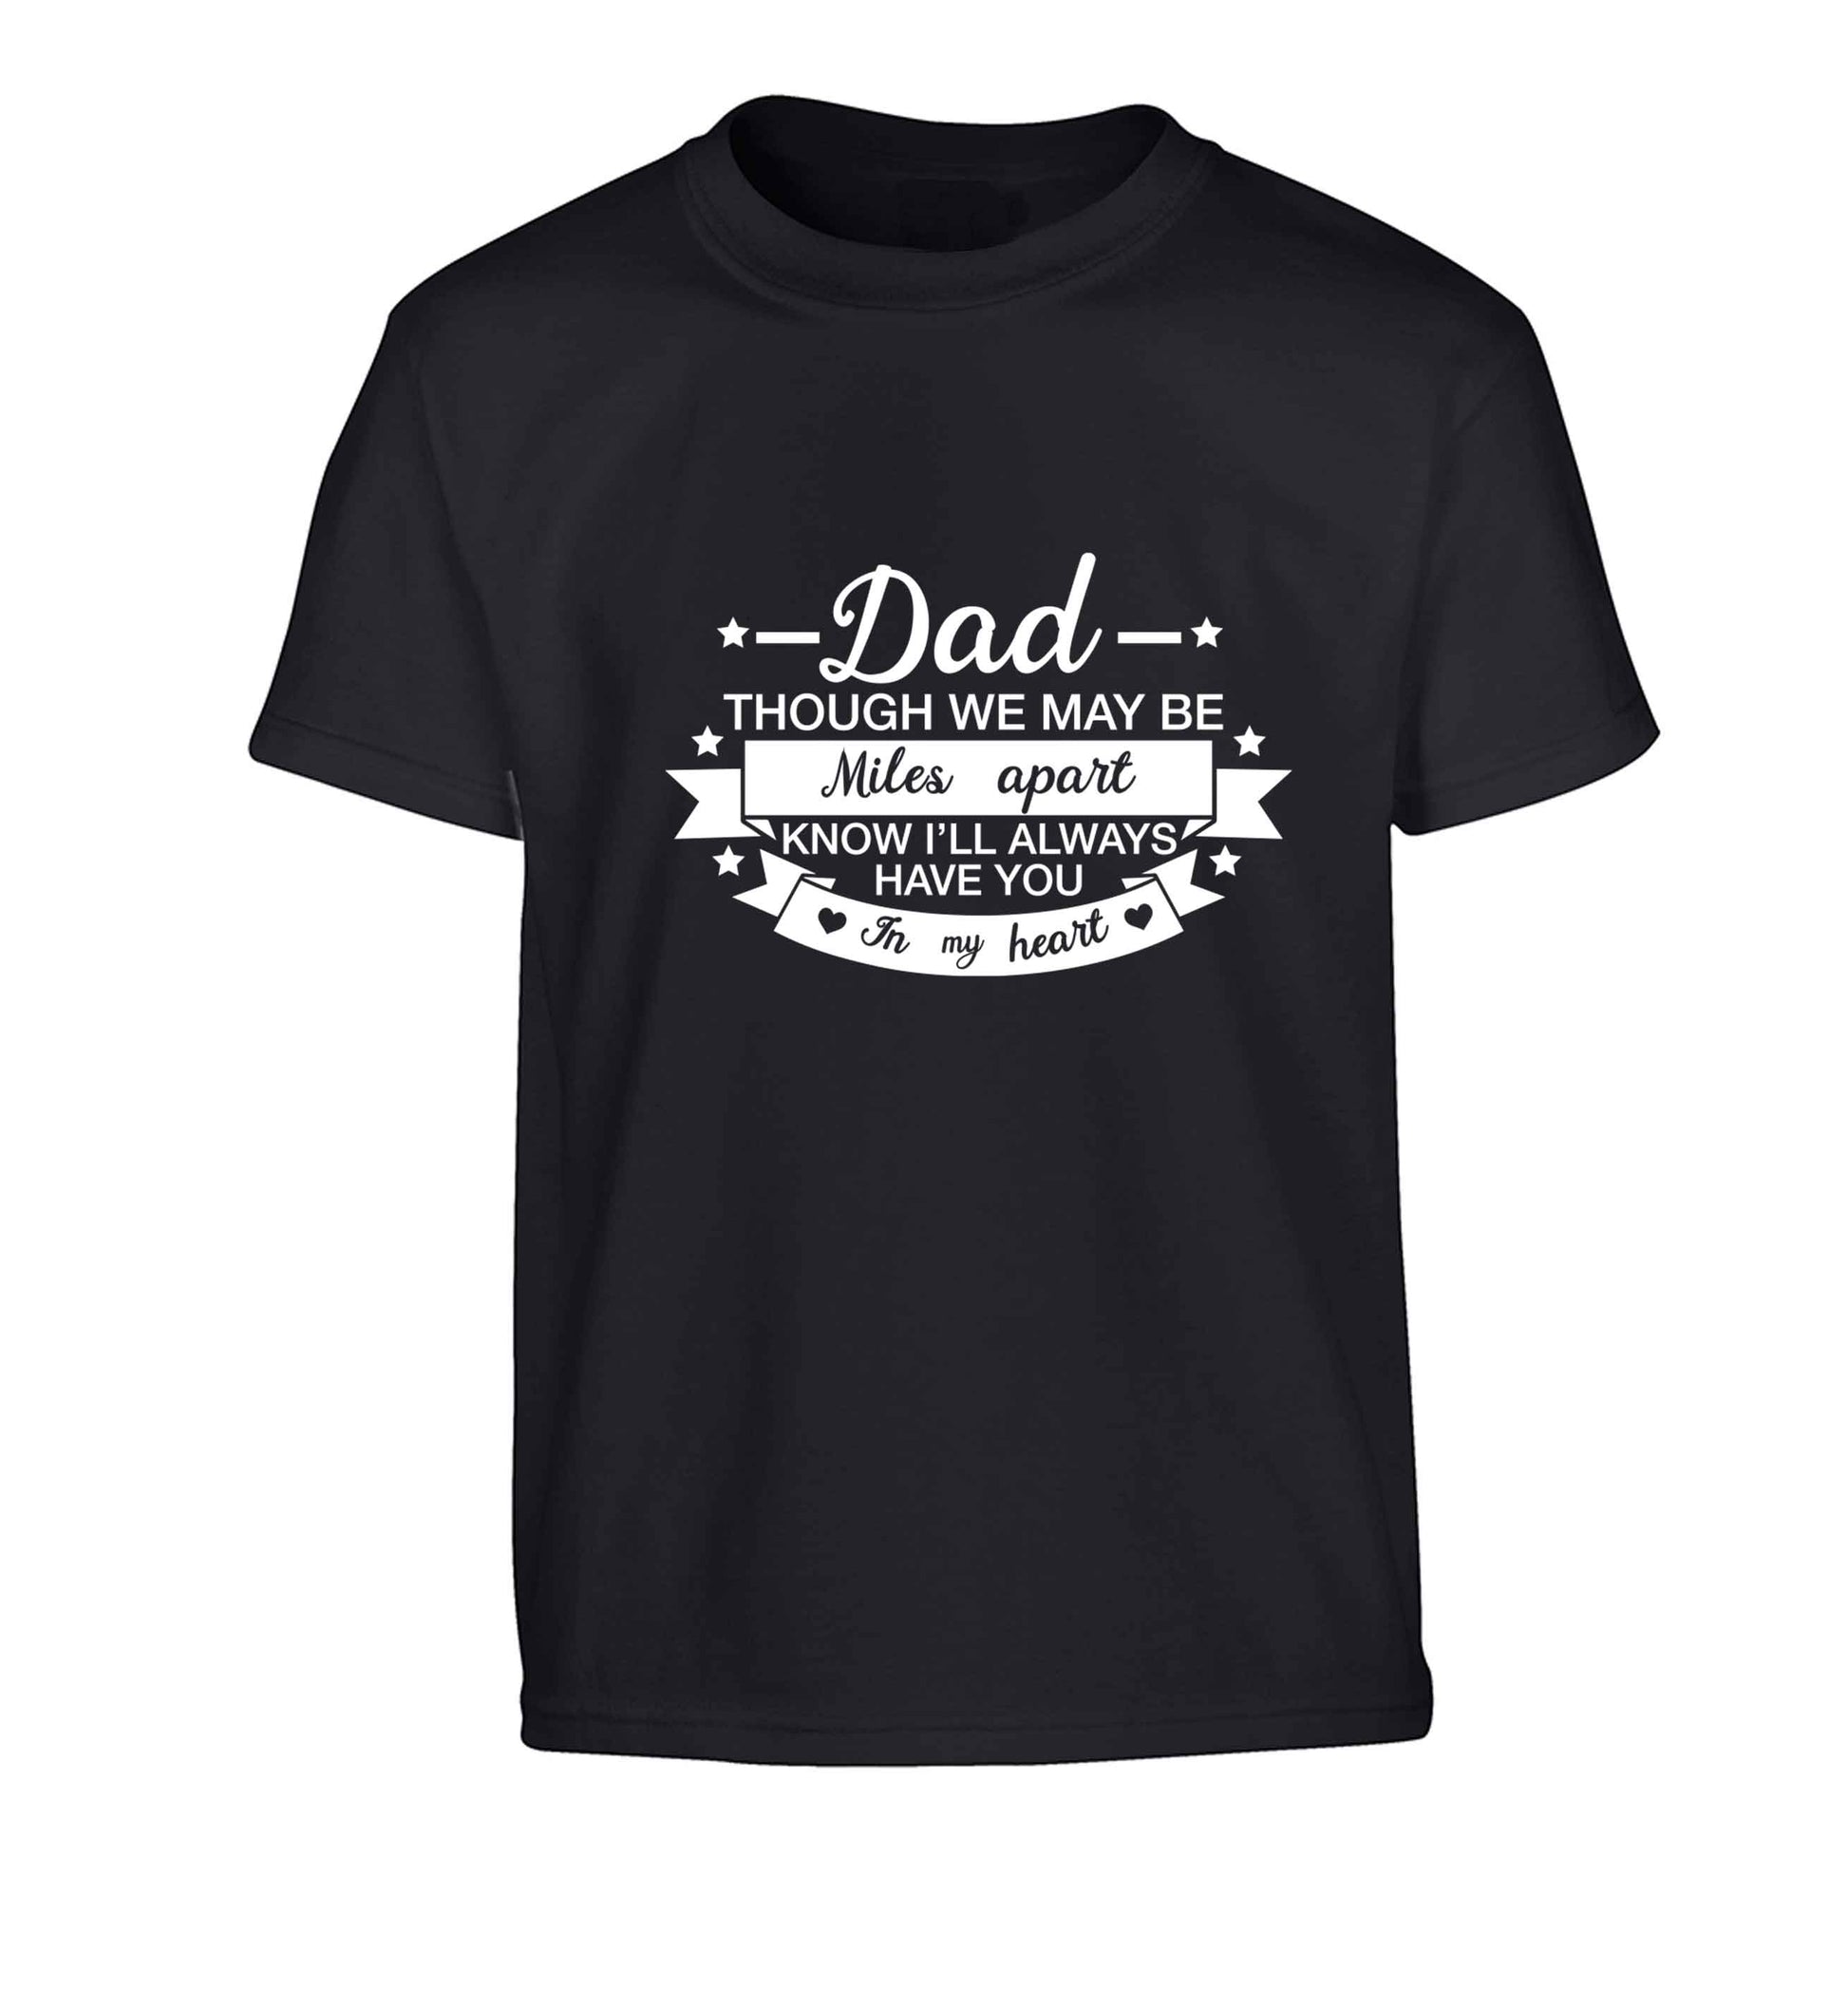 Dad though we are miles apart know I'll always have you in my heart Children's black Tshirt 12-13 Years